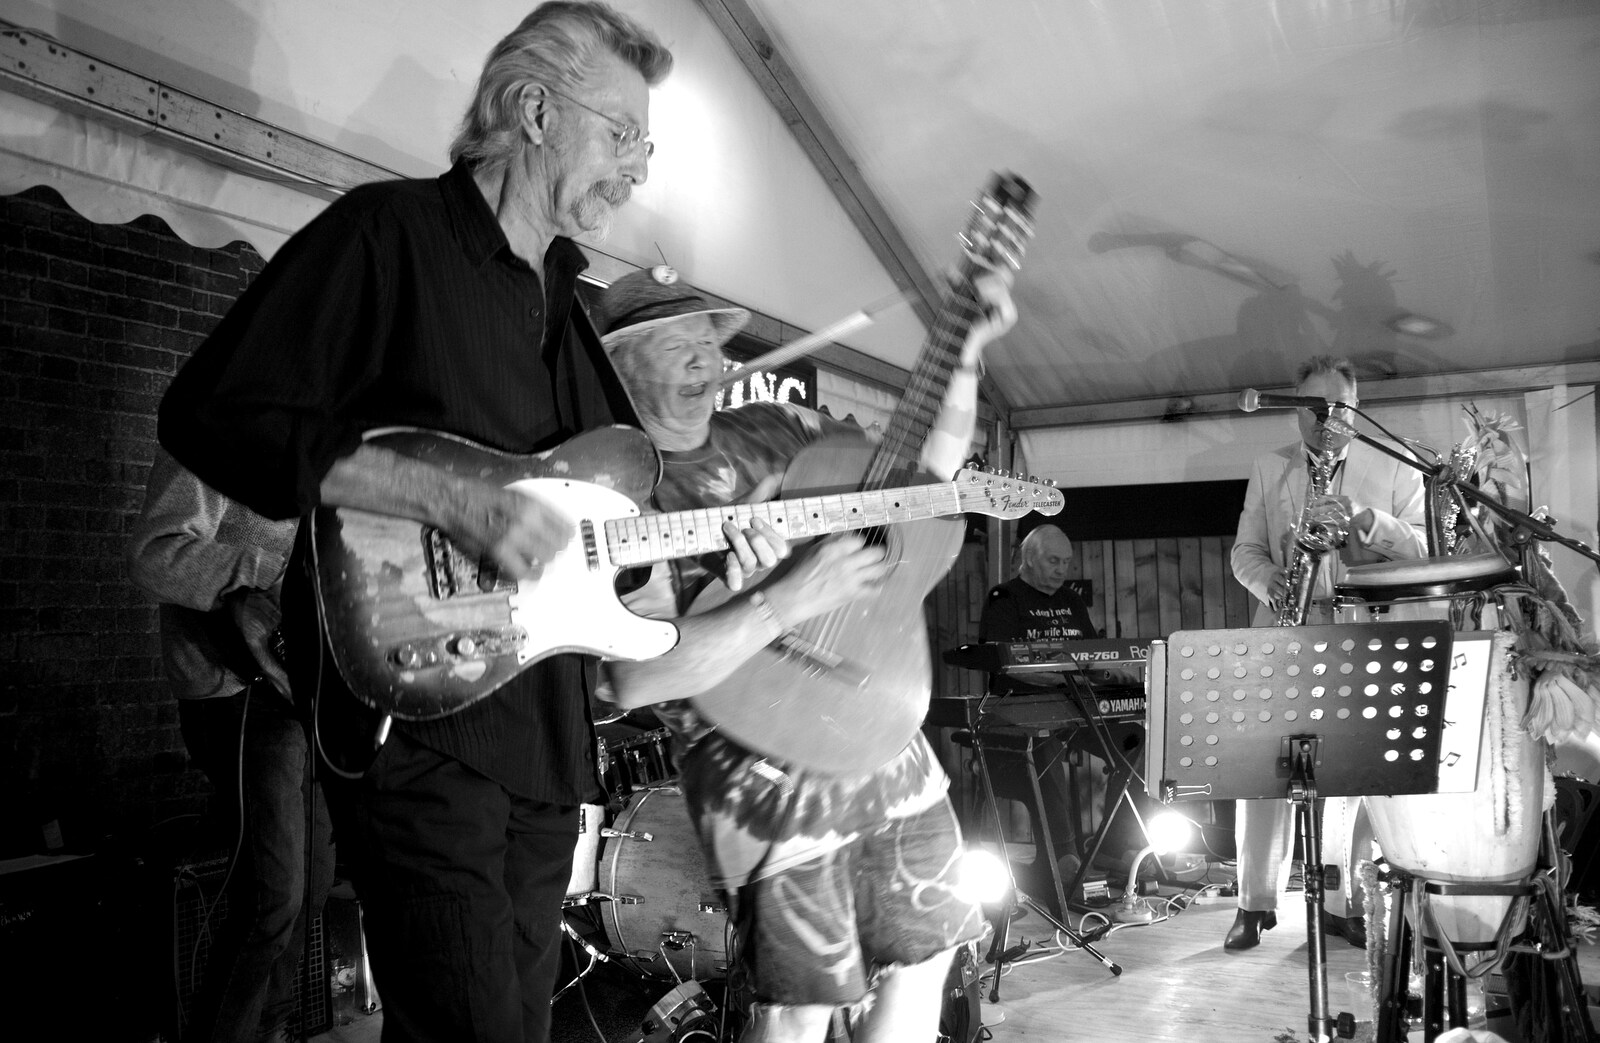 Mick the Baker on backing Spanish guitar from The Shakesbeer Festival, Star Wing Brewery, Redgrave, Suffolk - 13th July 2019